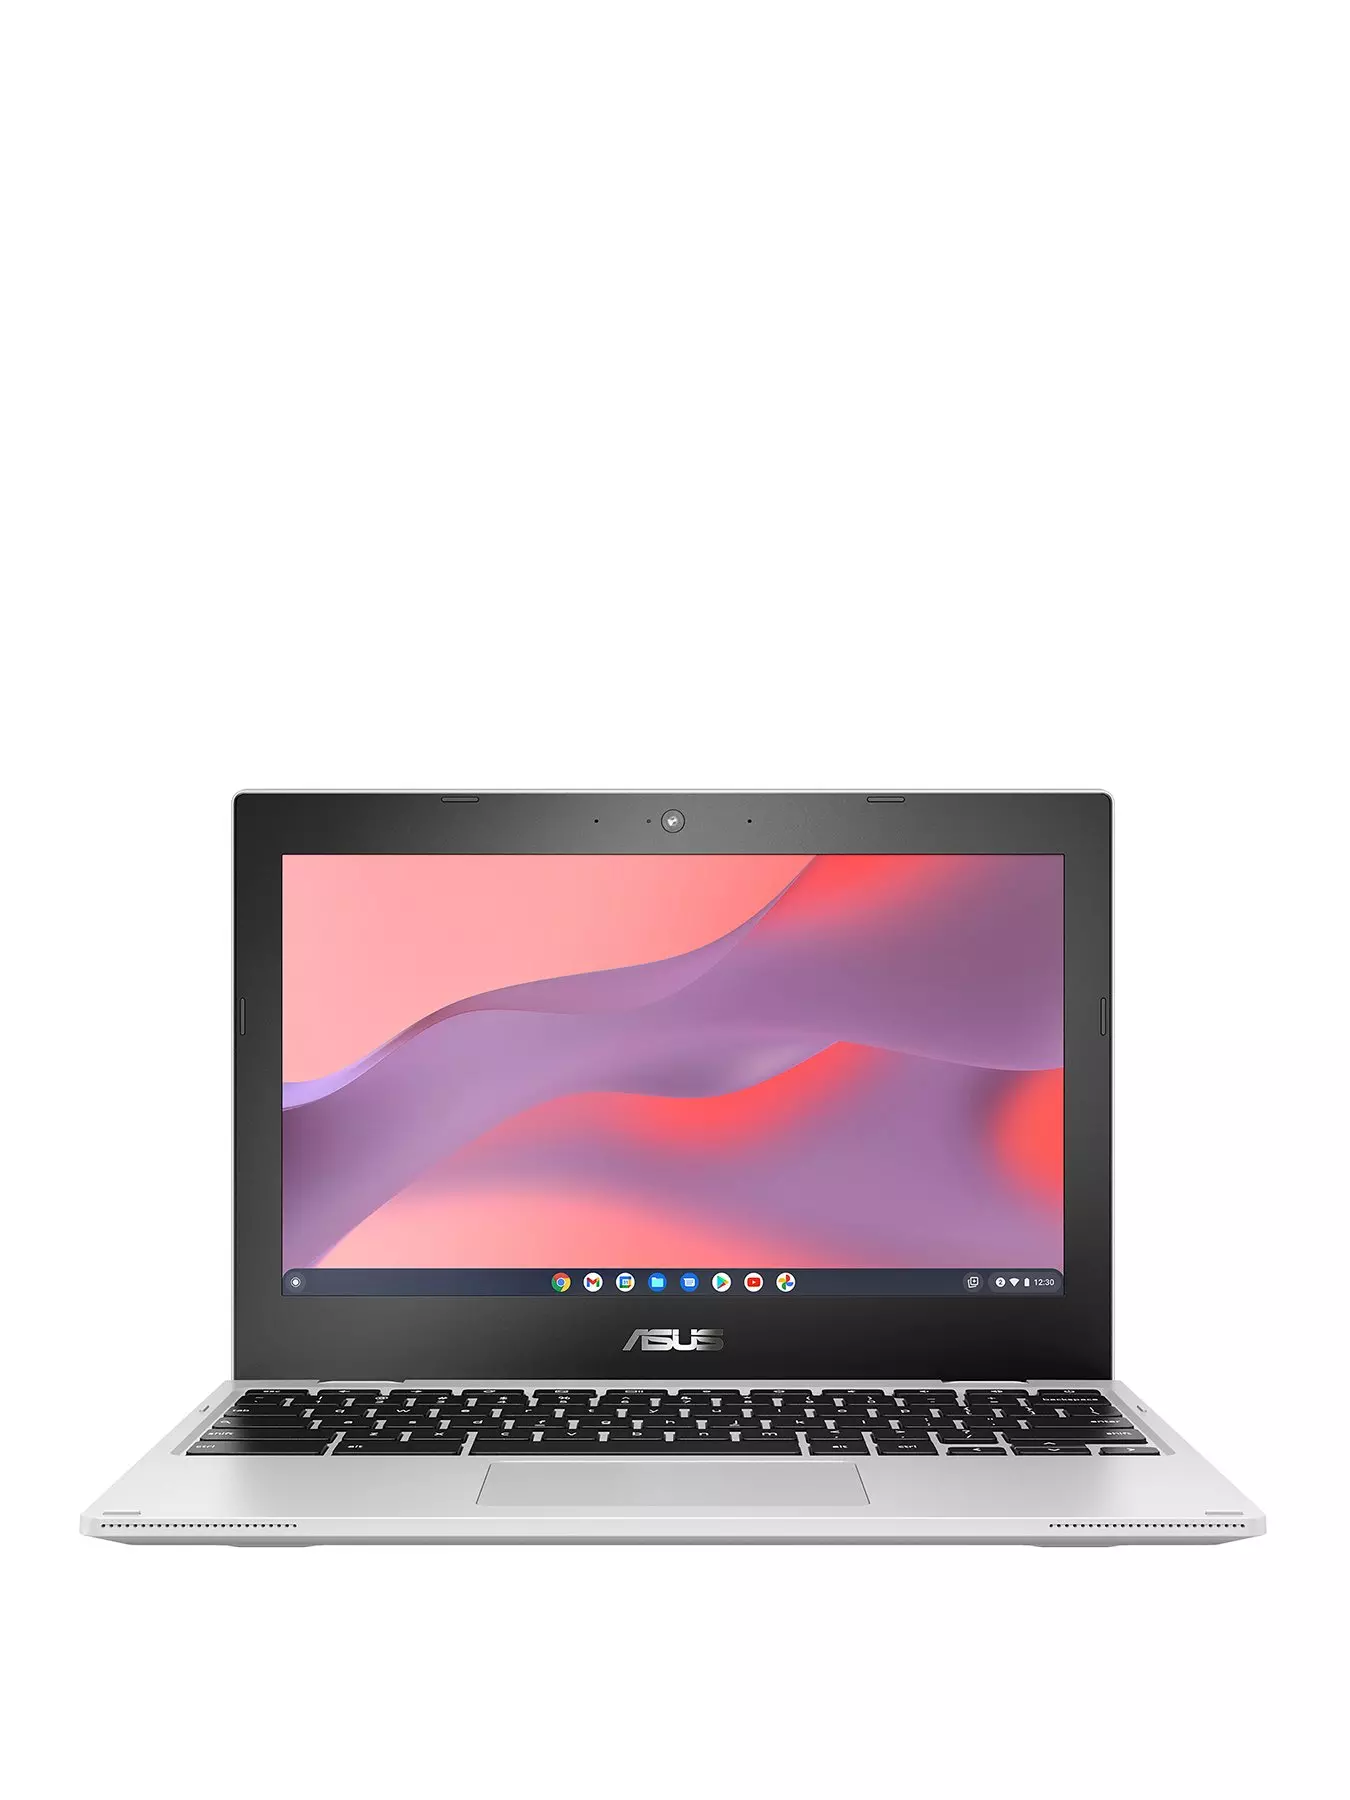 ASUS VivoBook Go 14 Flip Thin and Light 2-in-1 Laptop, 14” HD Touch, Intel  Celeron N4500 CPU, UHD Graphics, 4GB RAM, 64GB eMMC, NumberPad, Windows 11  Home in S mode, Quiet Blue